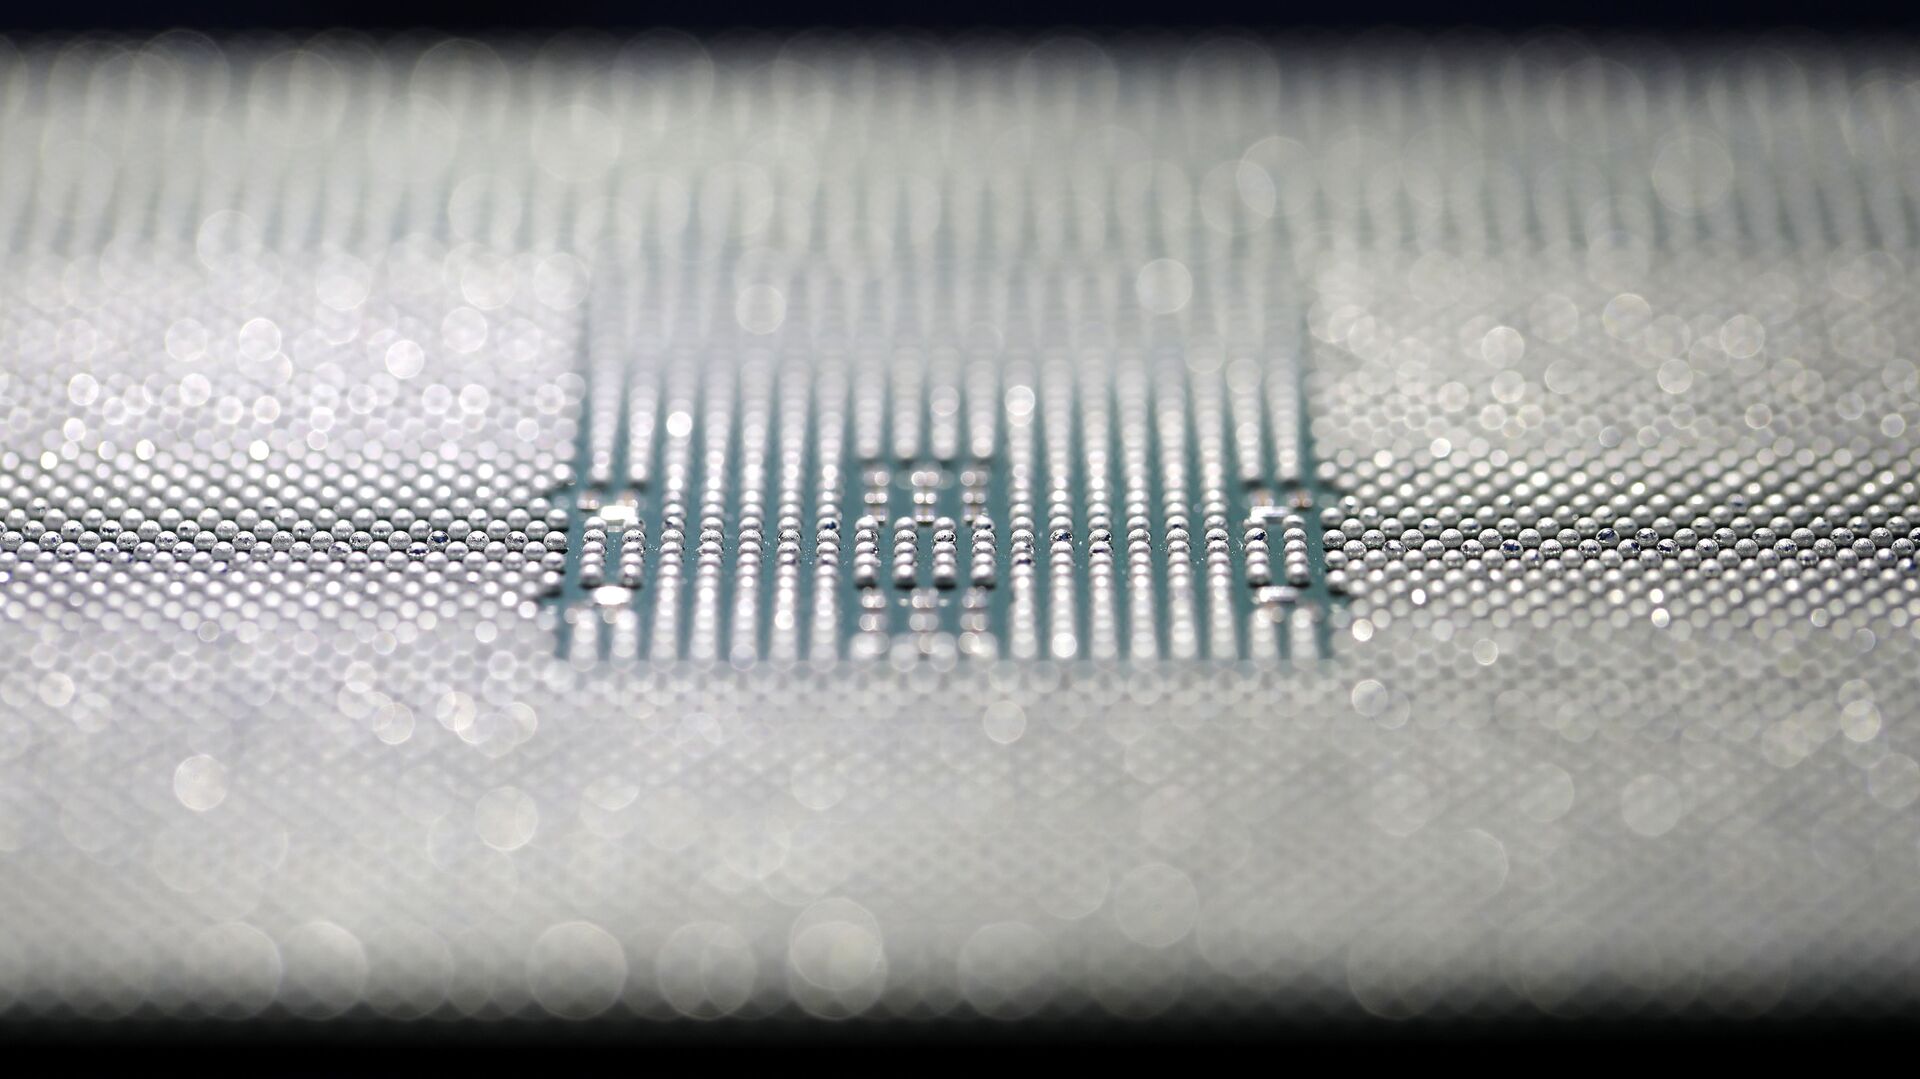 A Kunpeng 920 chip is displayed during an unveiling ceremony in Shenzhen, China, Monday, Jan. 7, 2019. Chinese telecom giant Huawei unveiled a processor chip for data centers and cloud computing as it expands into an emerging global market despite Western warnings the company might be a security risk.  - Sputnik International, 1920, 28.03.2023